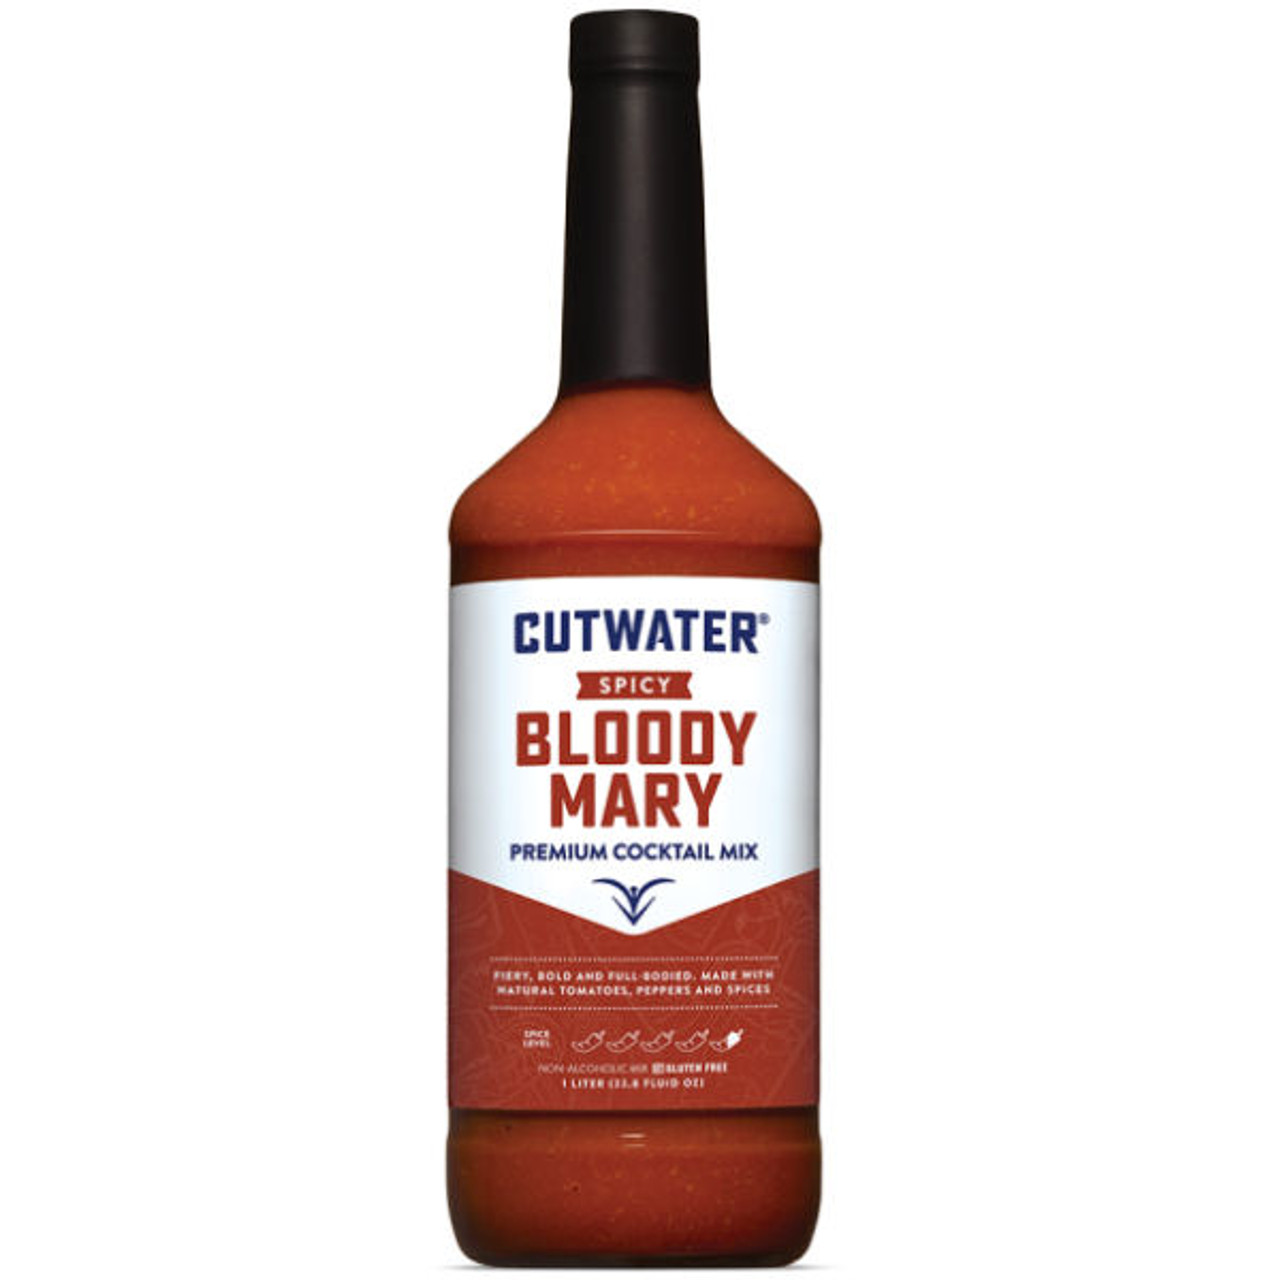 https://cdn11.bigcommerce.com/s-a04d0/images/stencil/1280x1280/products/11742/12498/cutwater-spirits-spicy-bloody-mary-mix-32oz__89650.1661873733.jpg?c=2